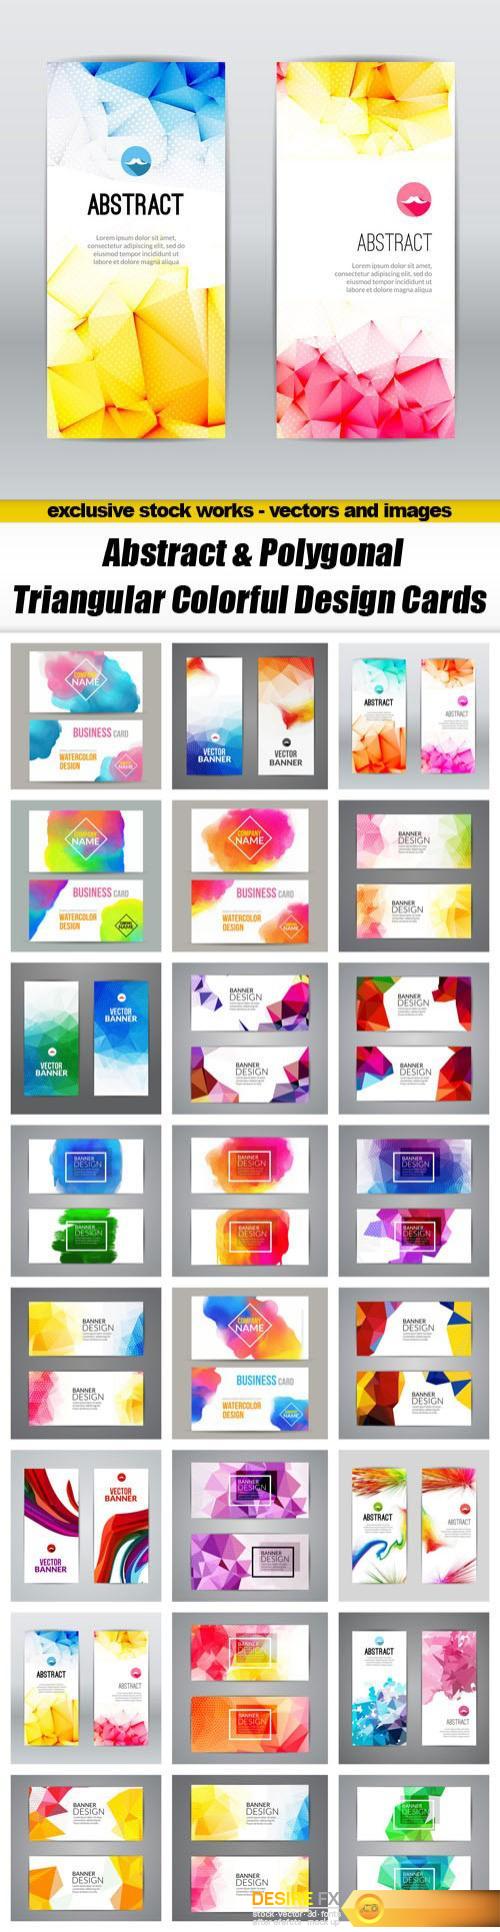 Abstract & Polygonal Triangular Colorful Design Cards - 24xEPS